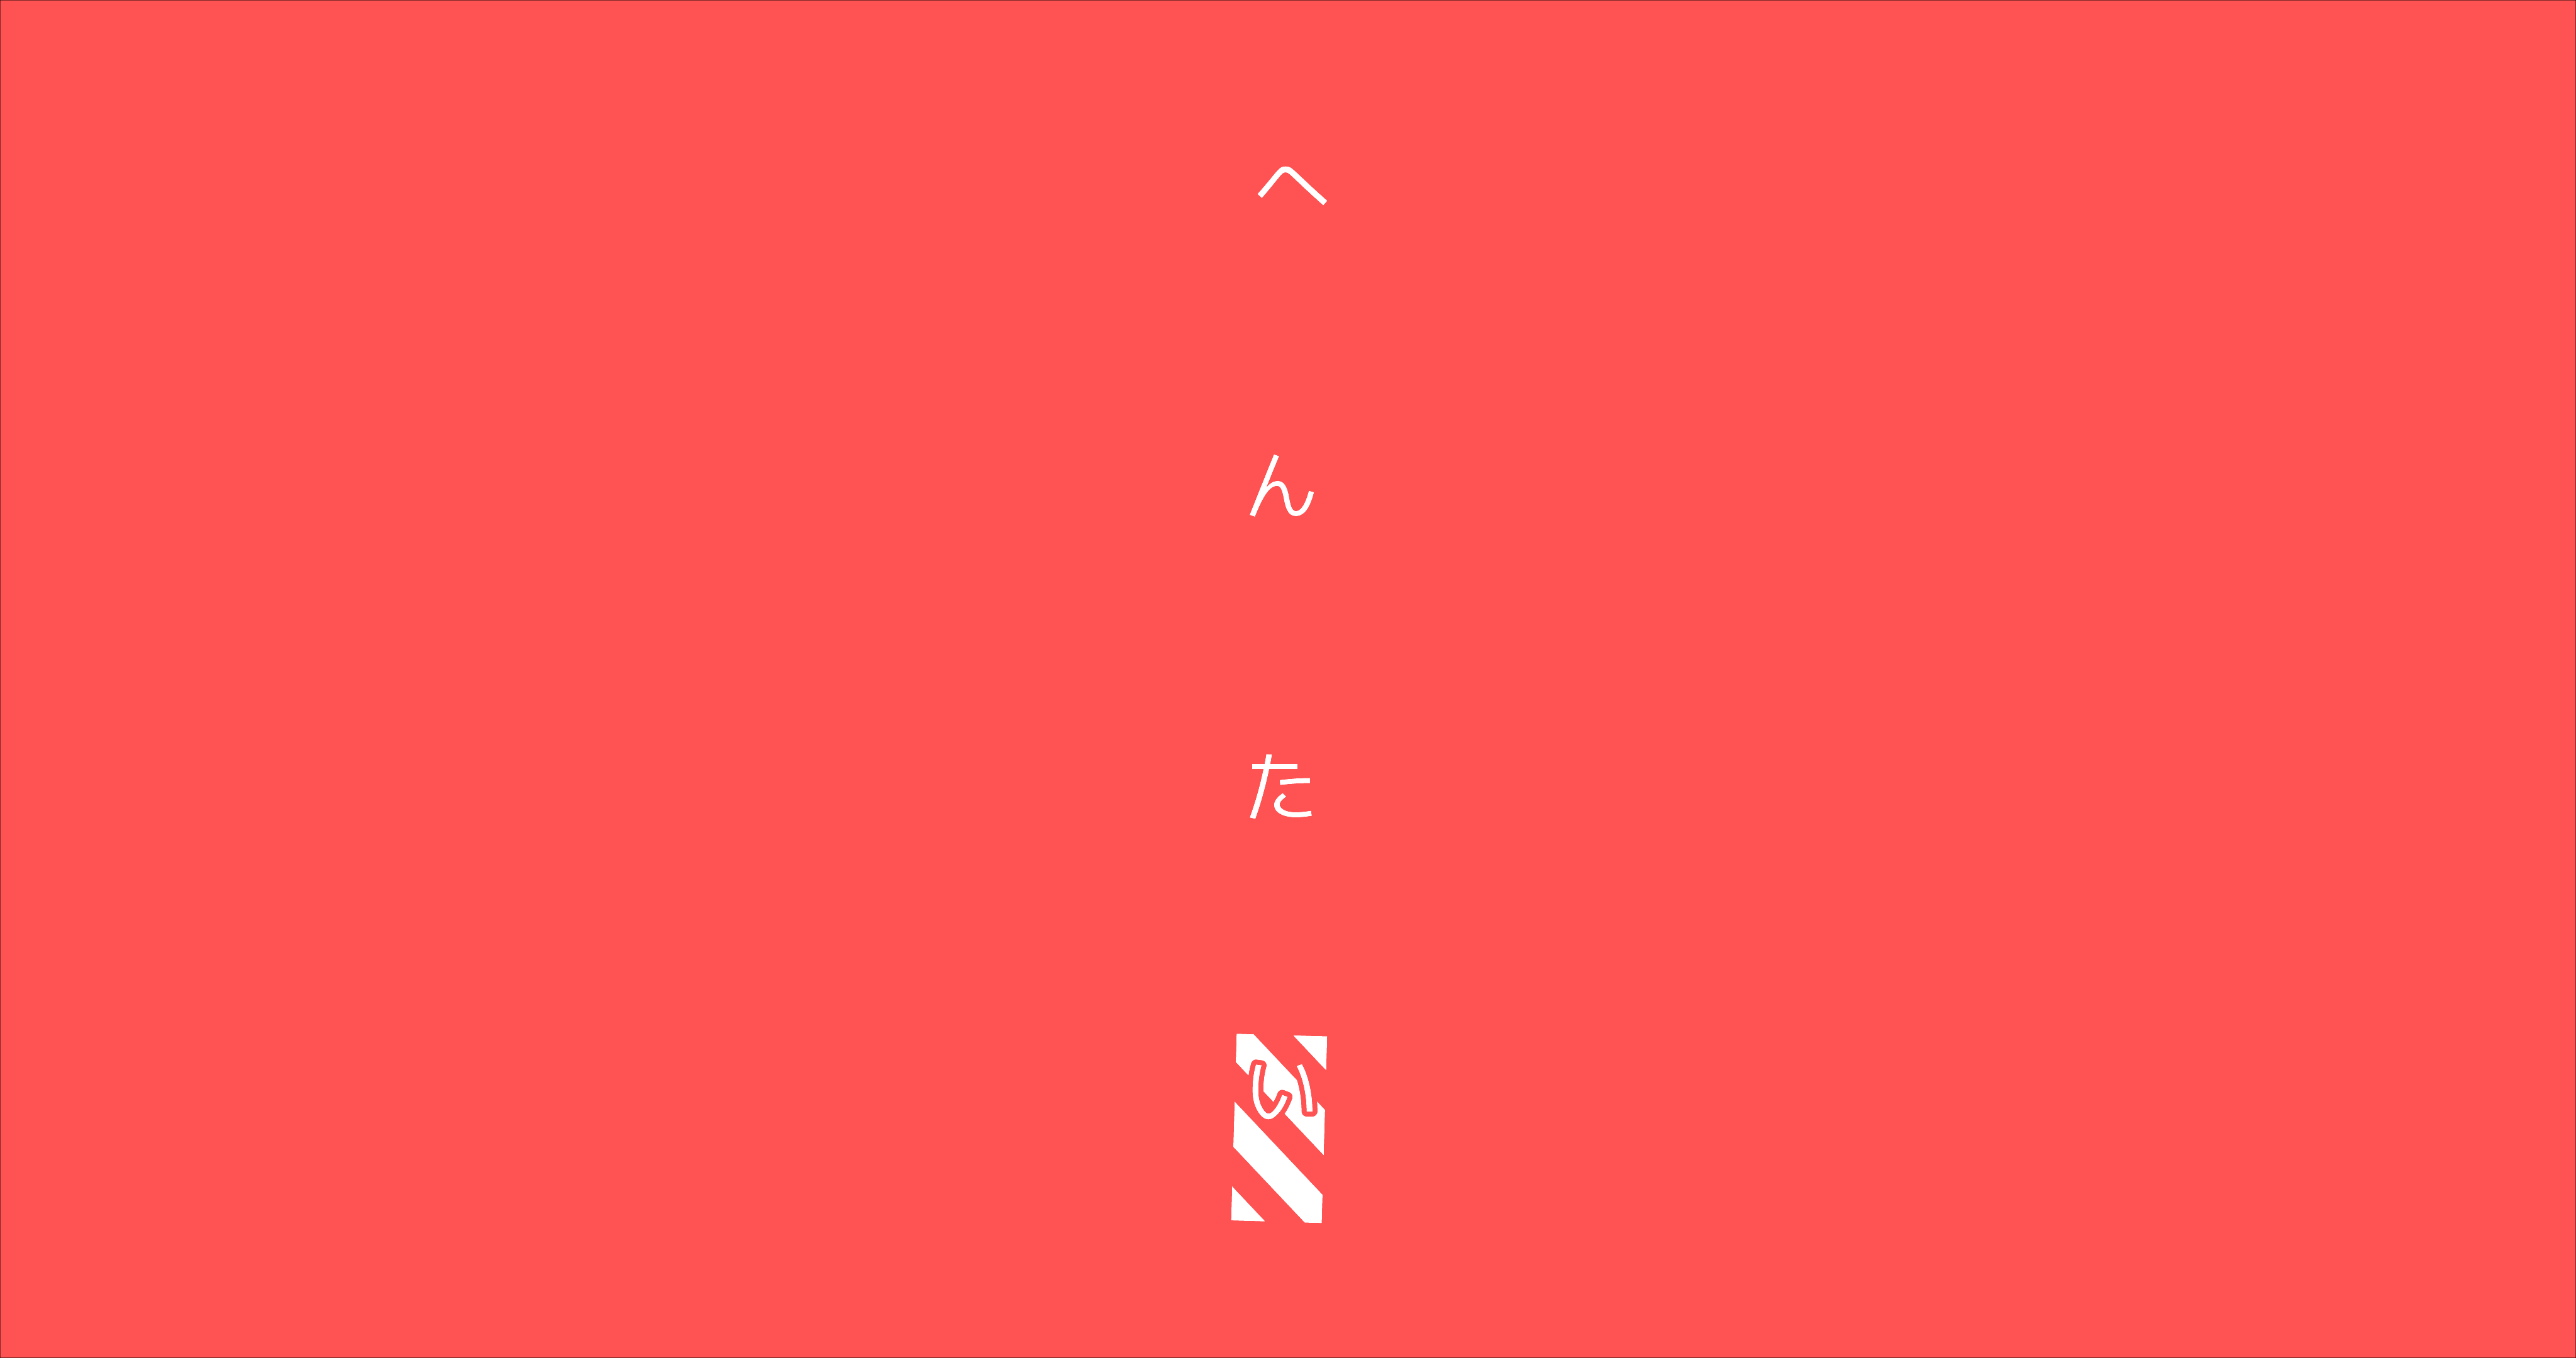 Vertical, spaced-out kanji typography in white, over a material-design red background.